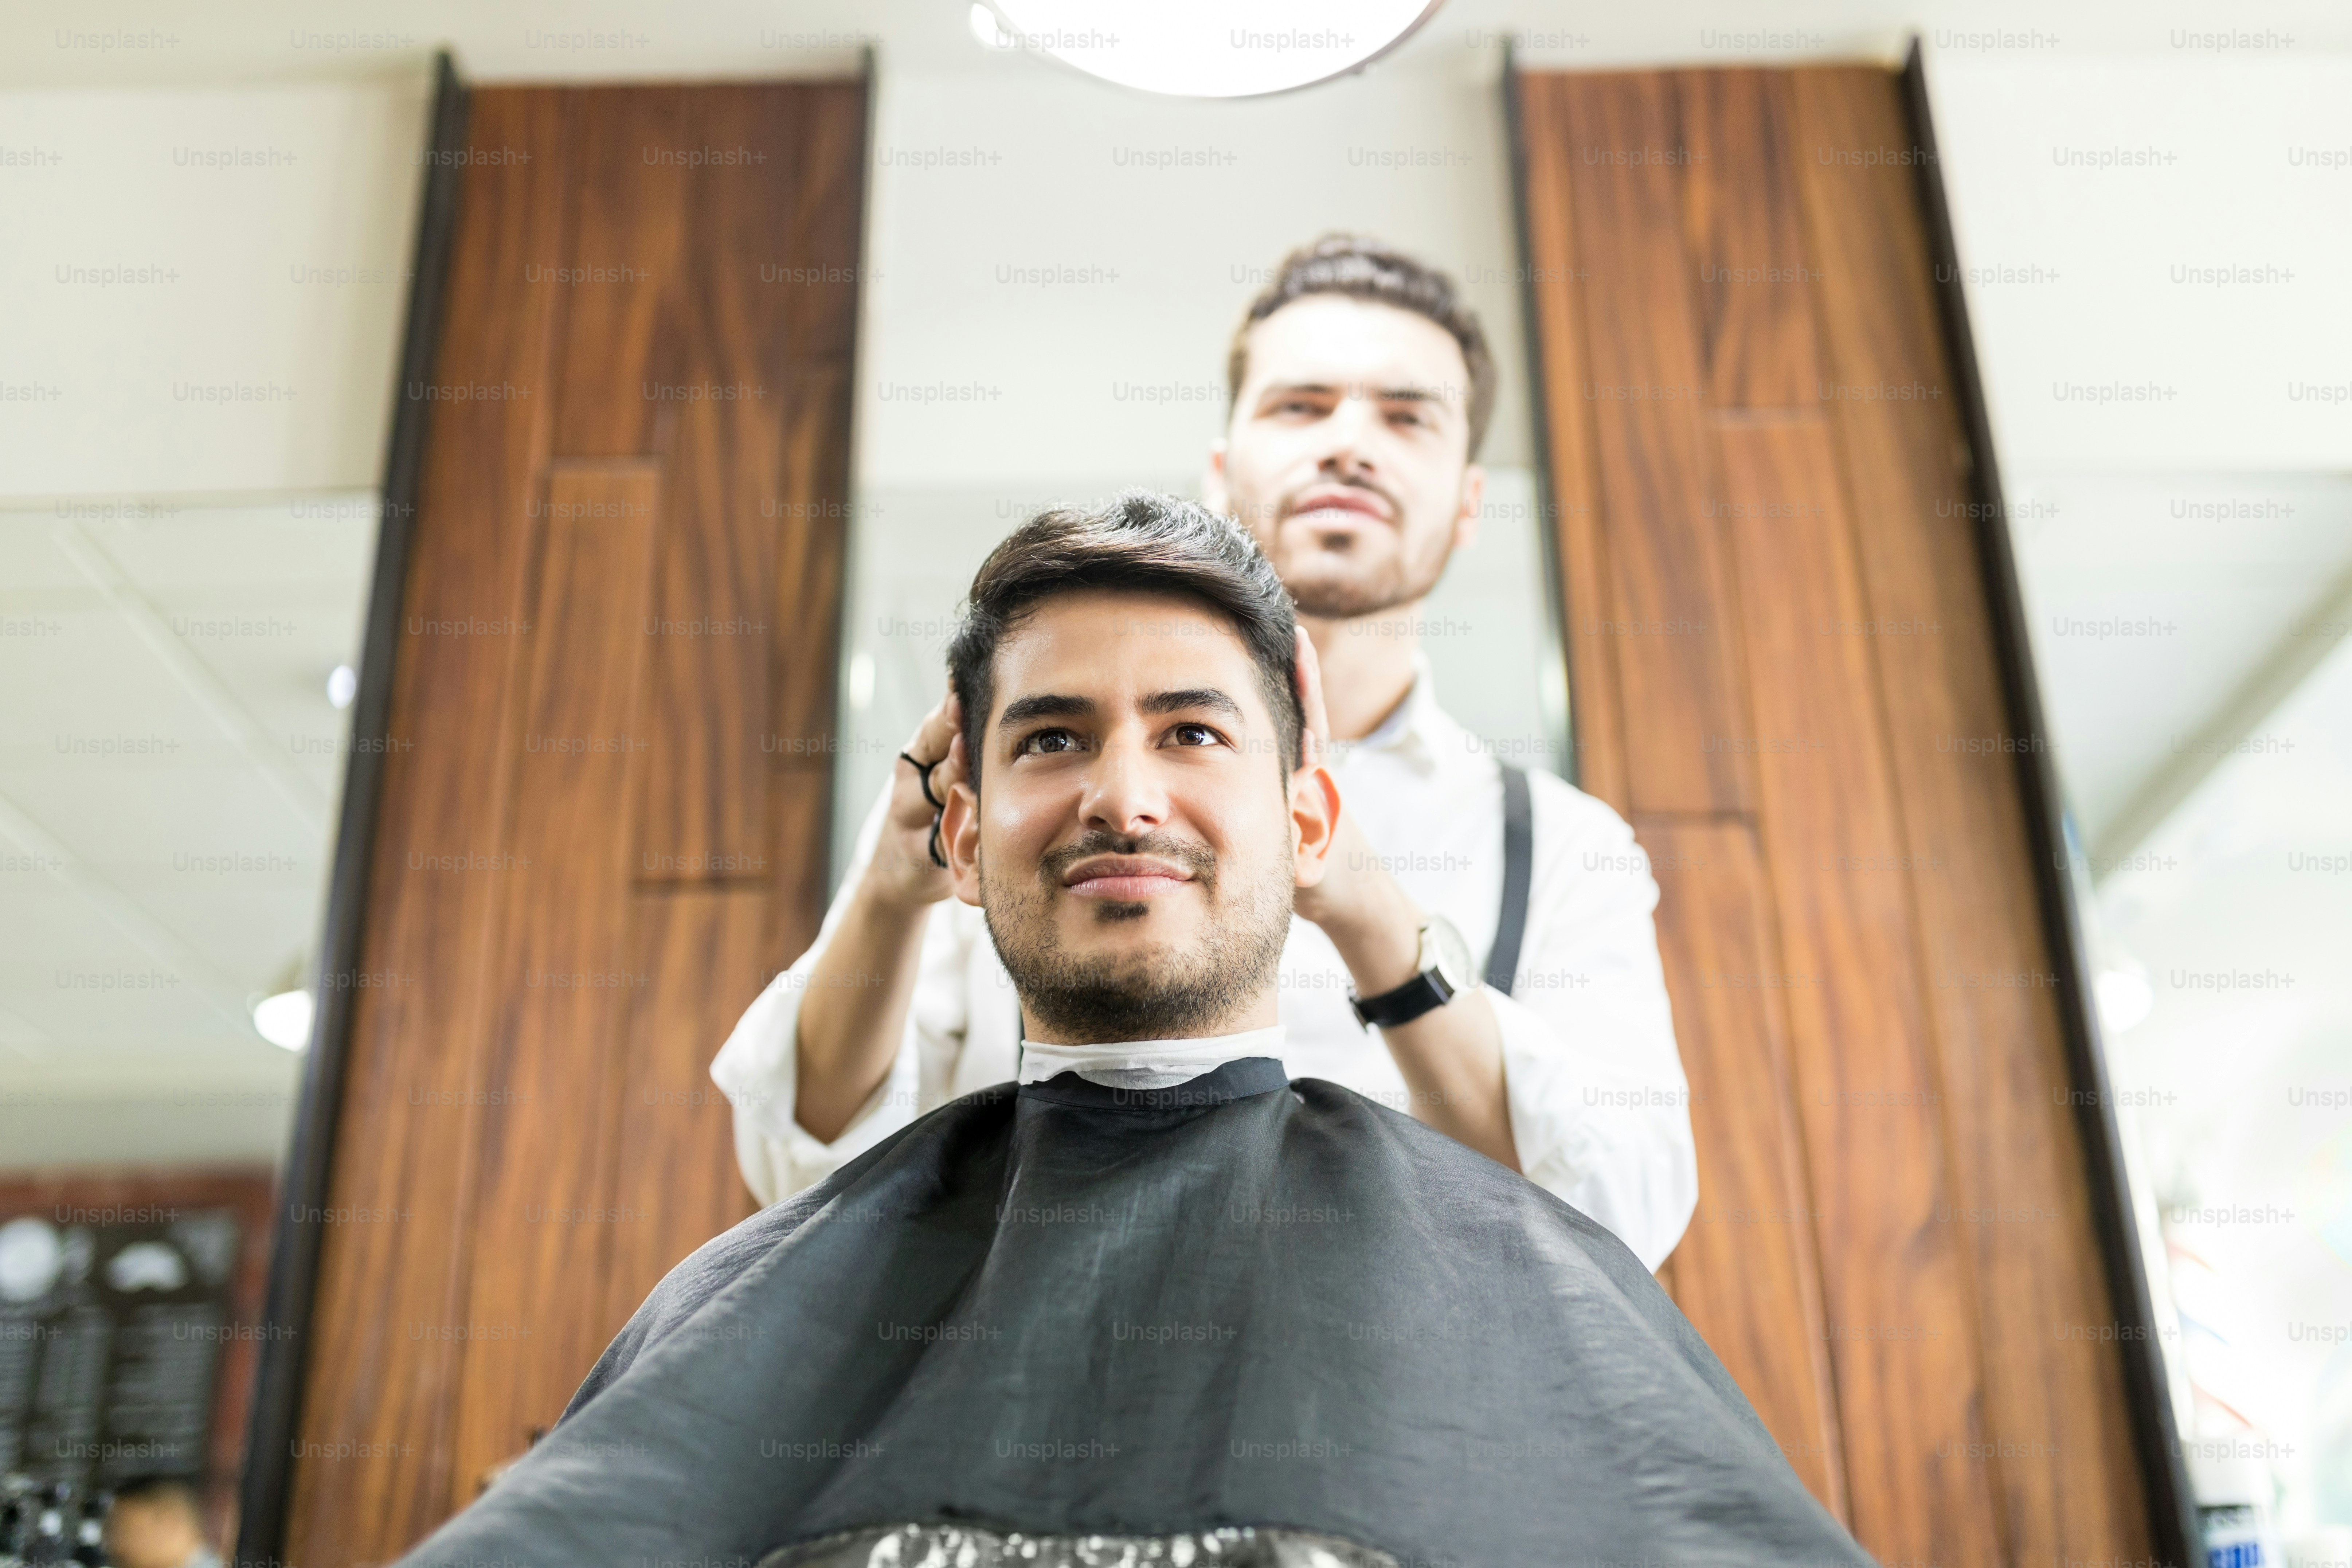 Client during beard and hair grooming in barber shop photo – Brazilian  ethnicity Image on Unsplash